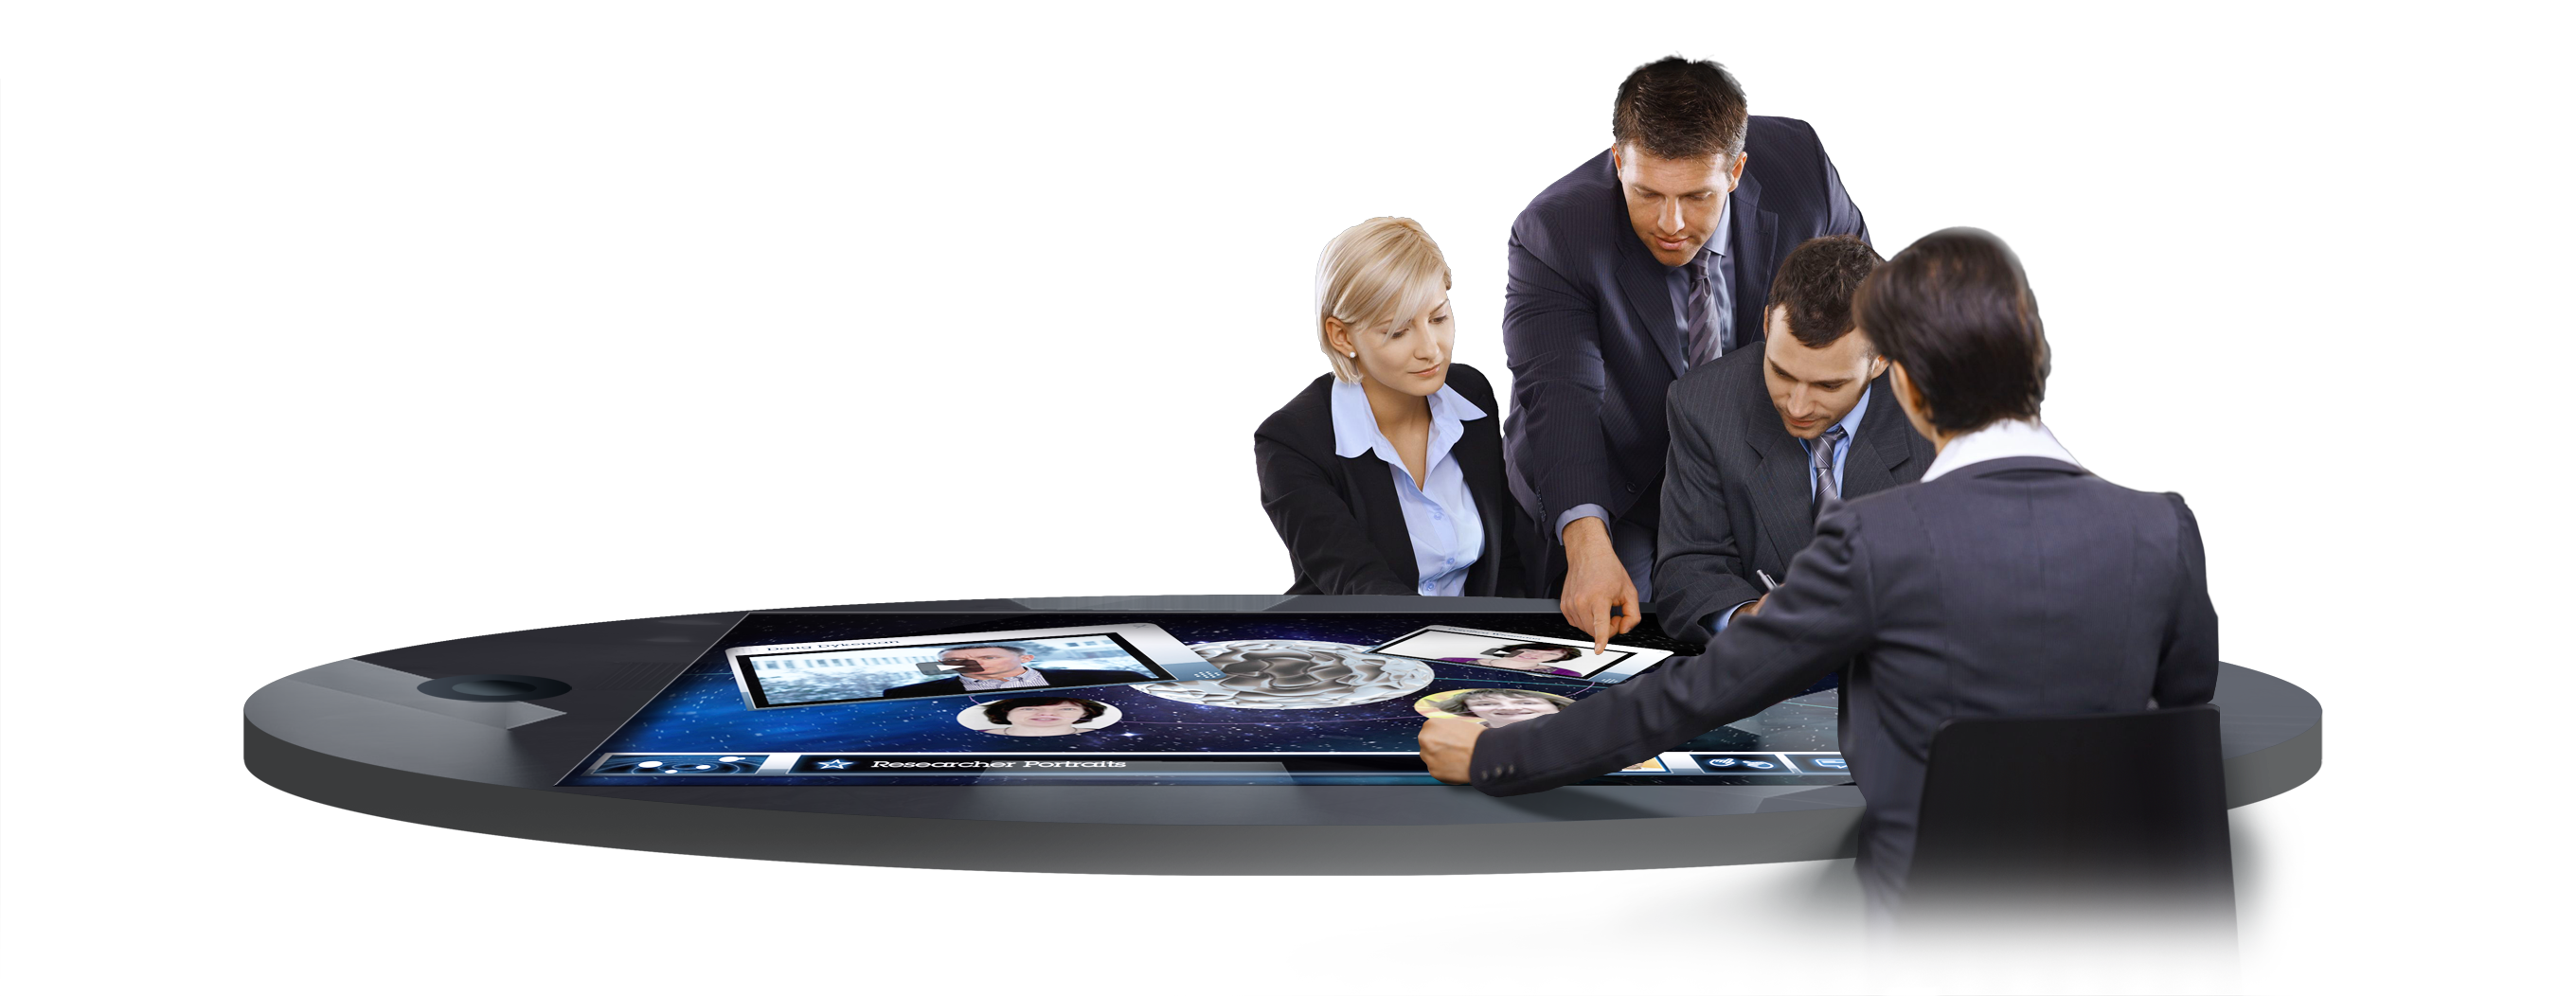 multitouch demo software